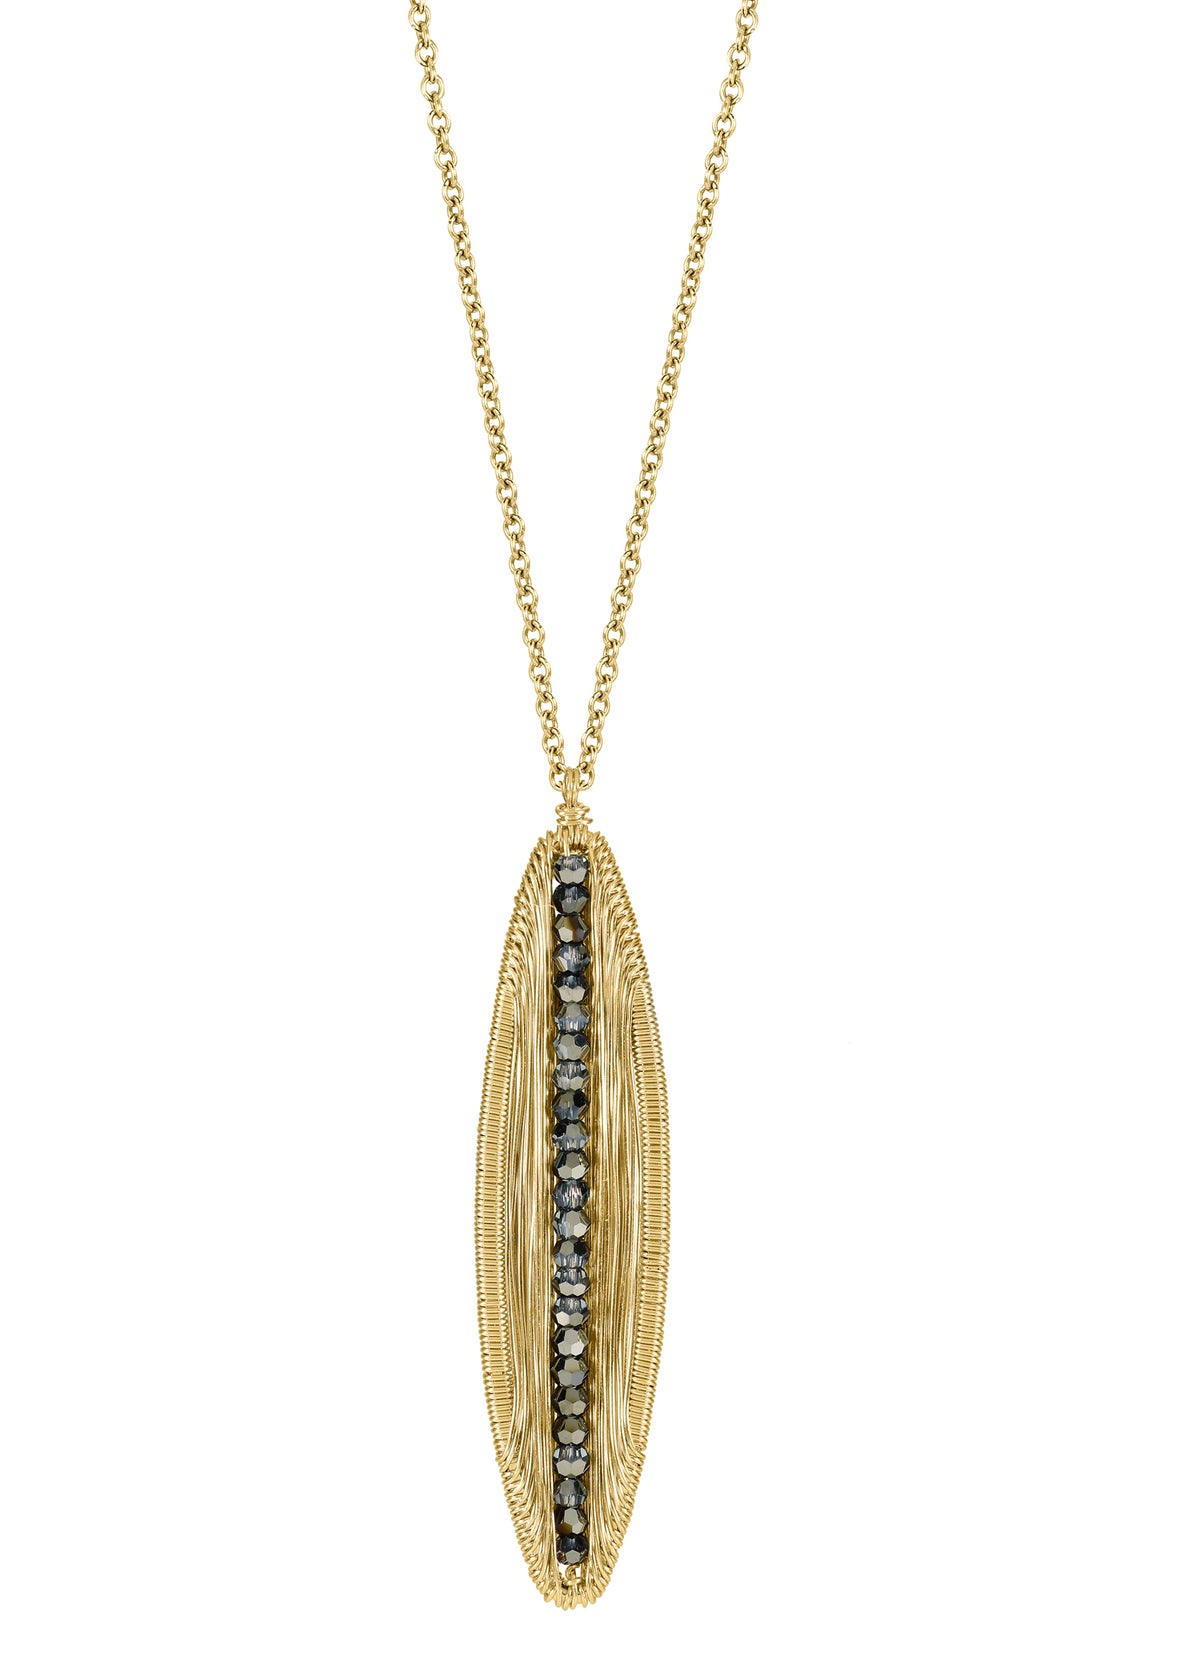 Crystal 14k gold fill Necklace measures 18&quot; in length Pendant measures 1-11/16&quot; in length and 3/8&quot; in width at the widest point Handmade in our Los Angeles studio